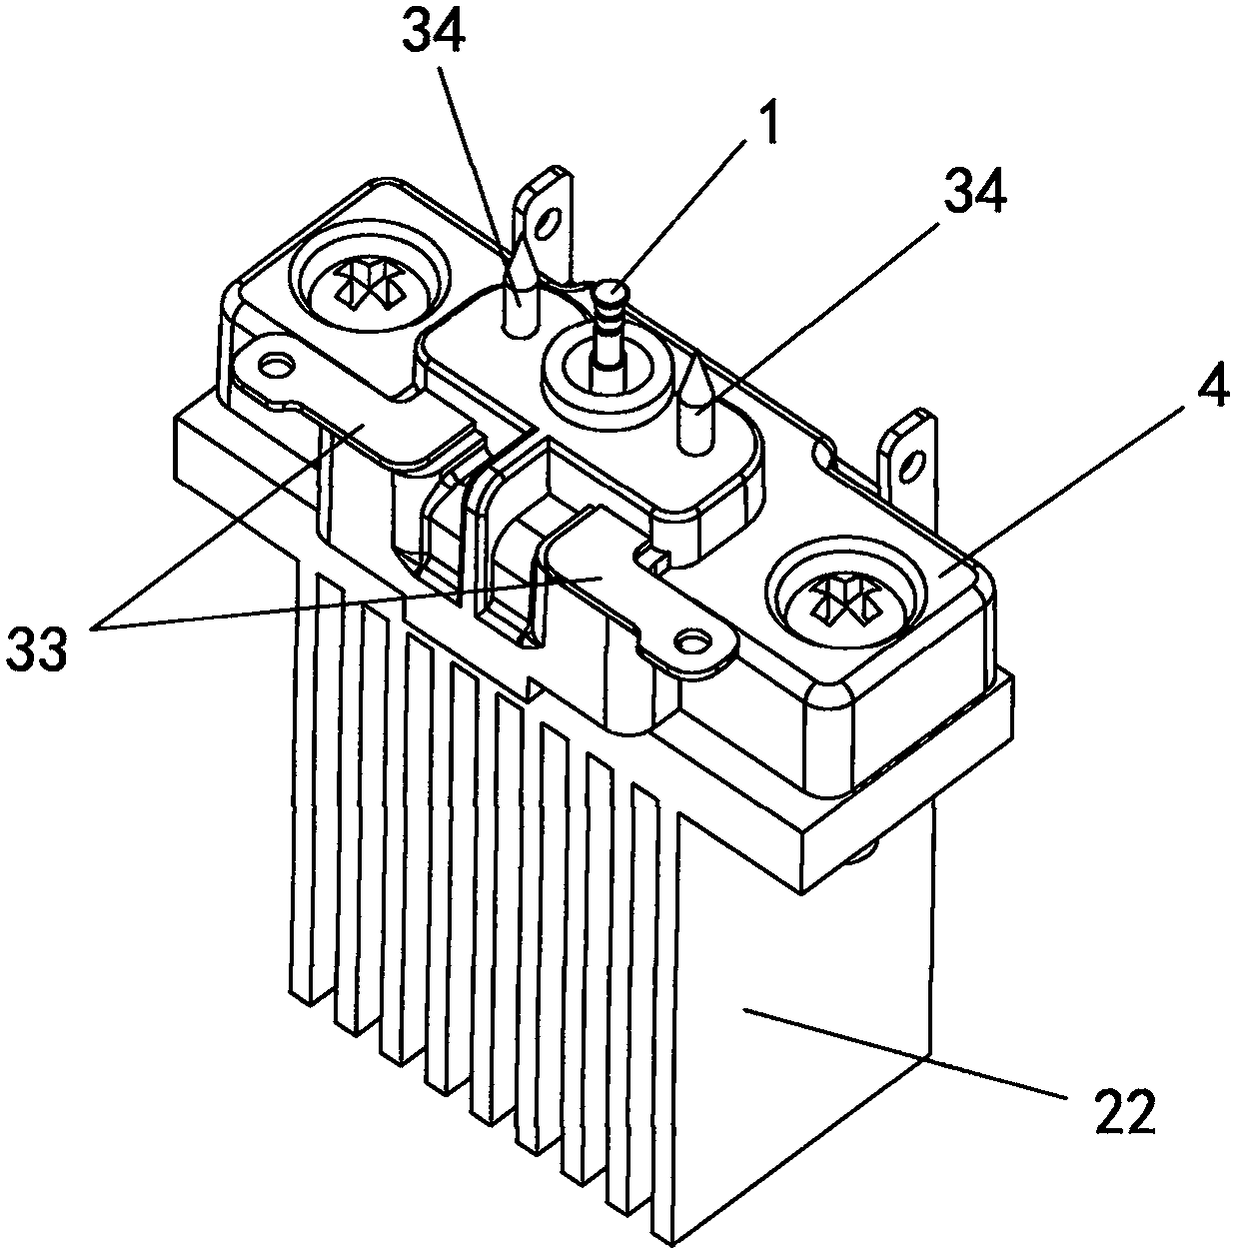 Water particle generating device